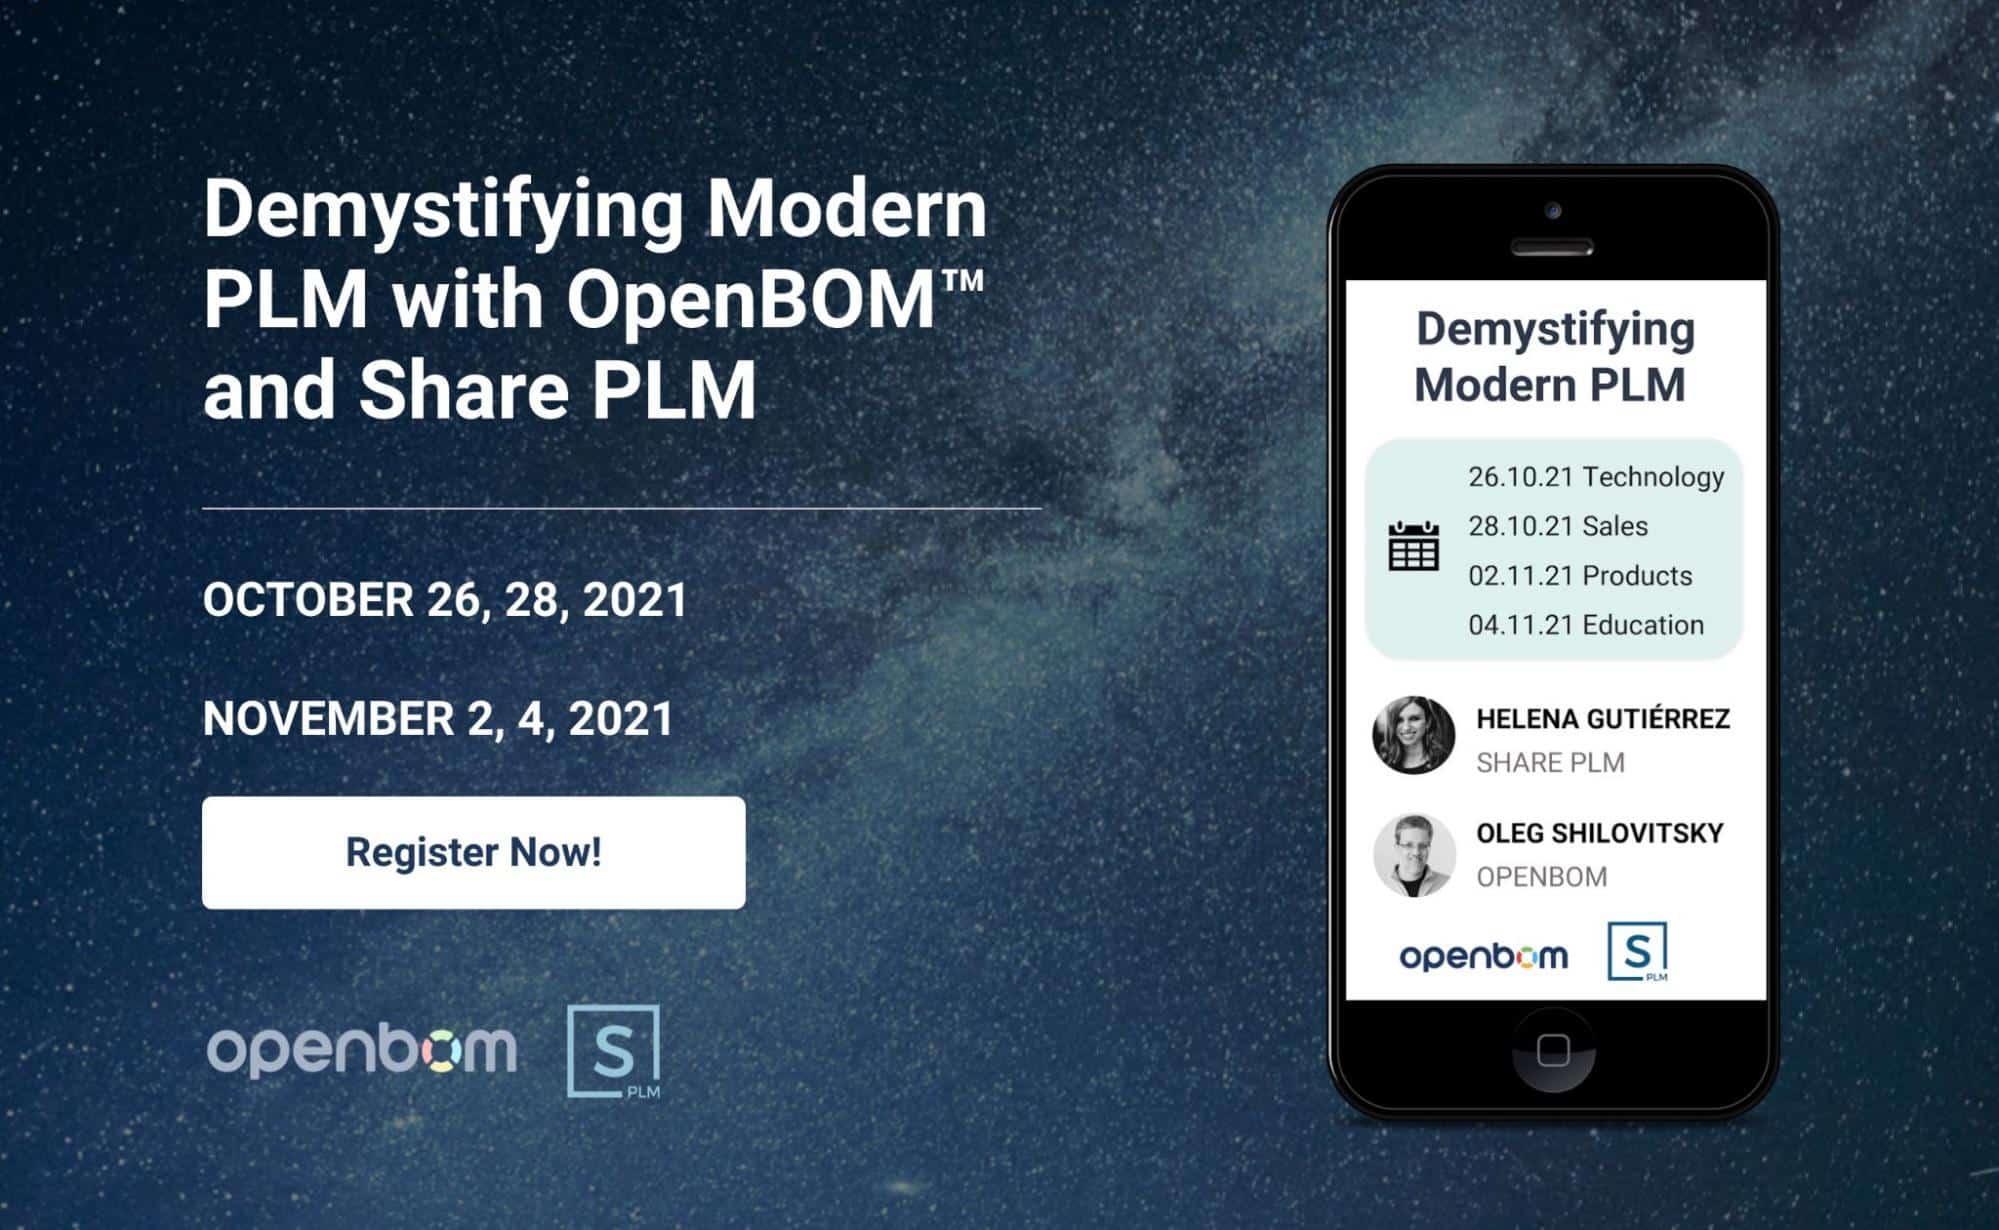 Demystify Modern PLM Event With Share PLM